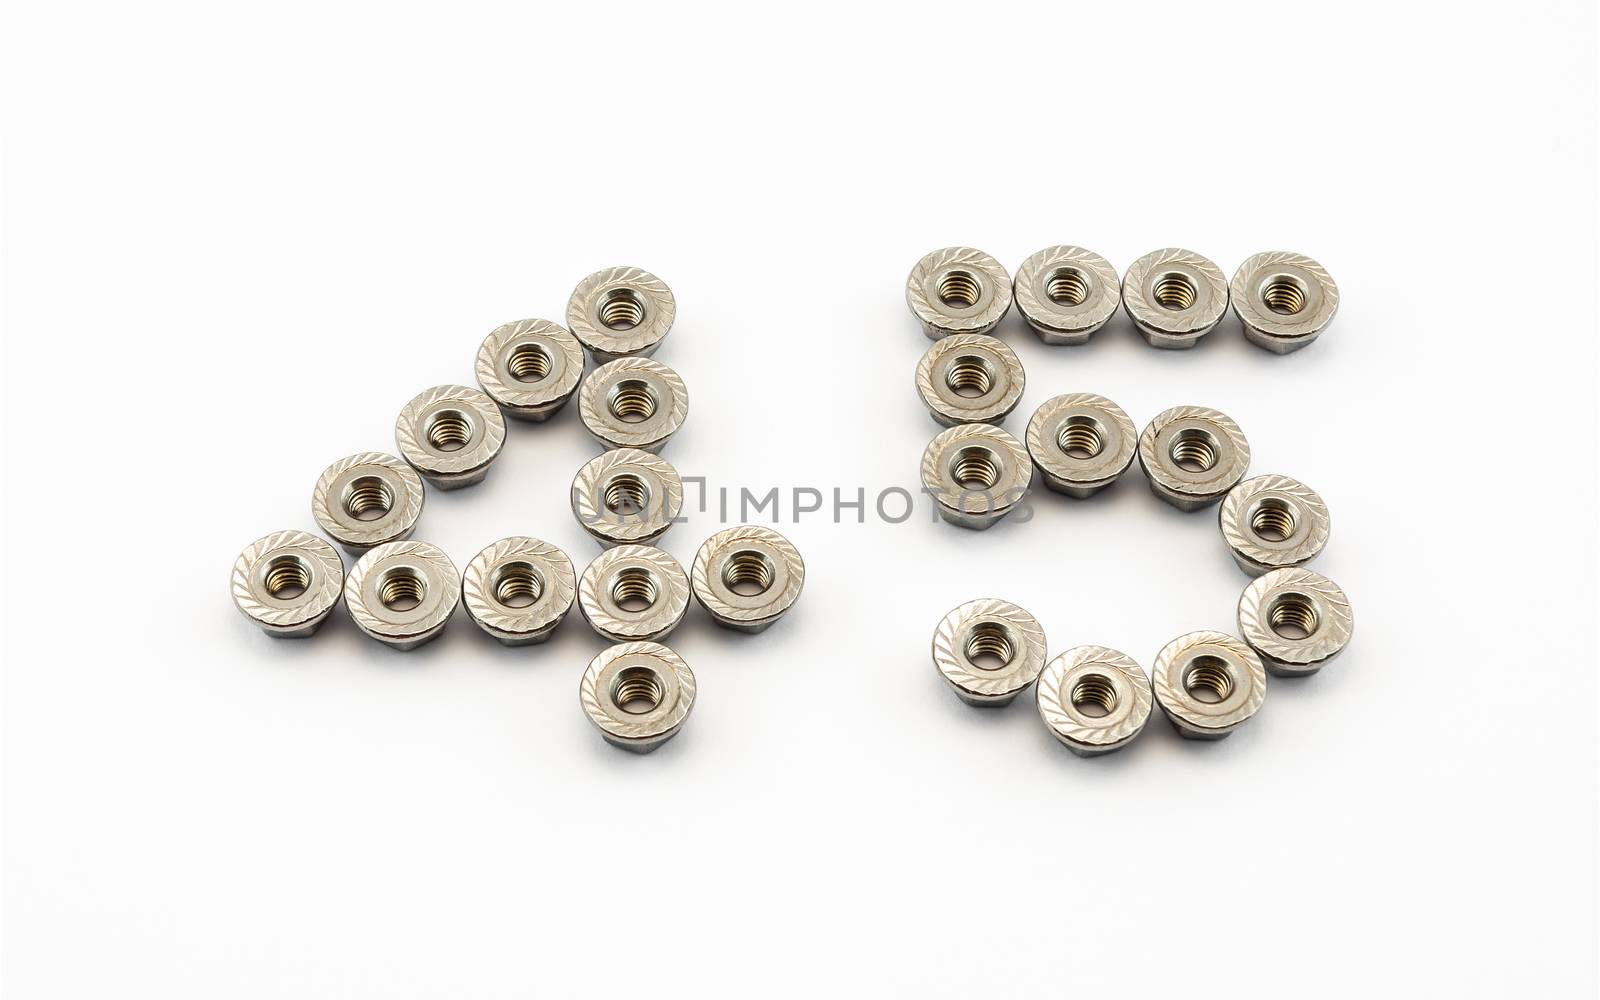 4 and 5 Number, Created by Stainless Steel Hex Flange Nuts.